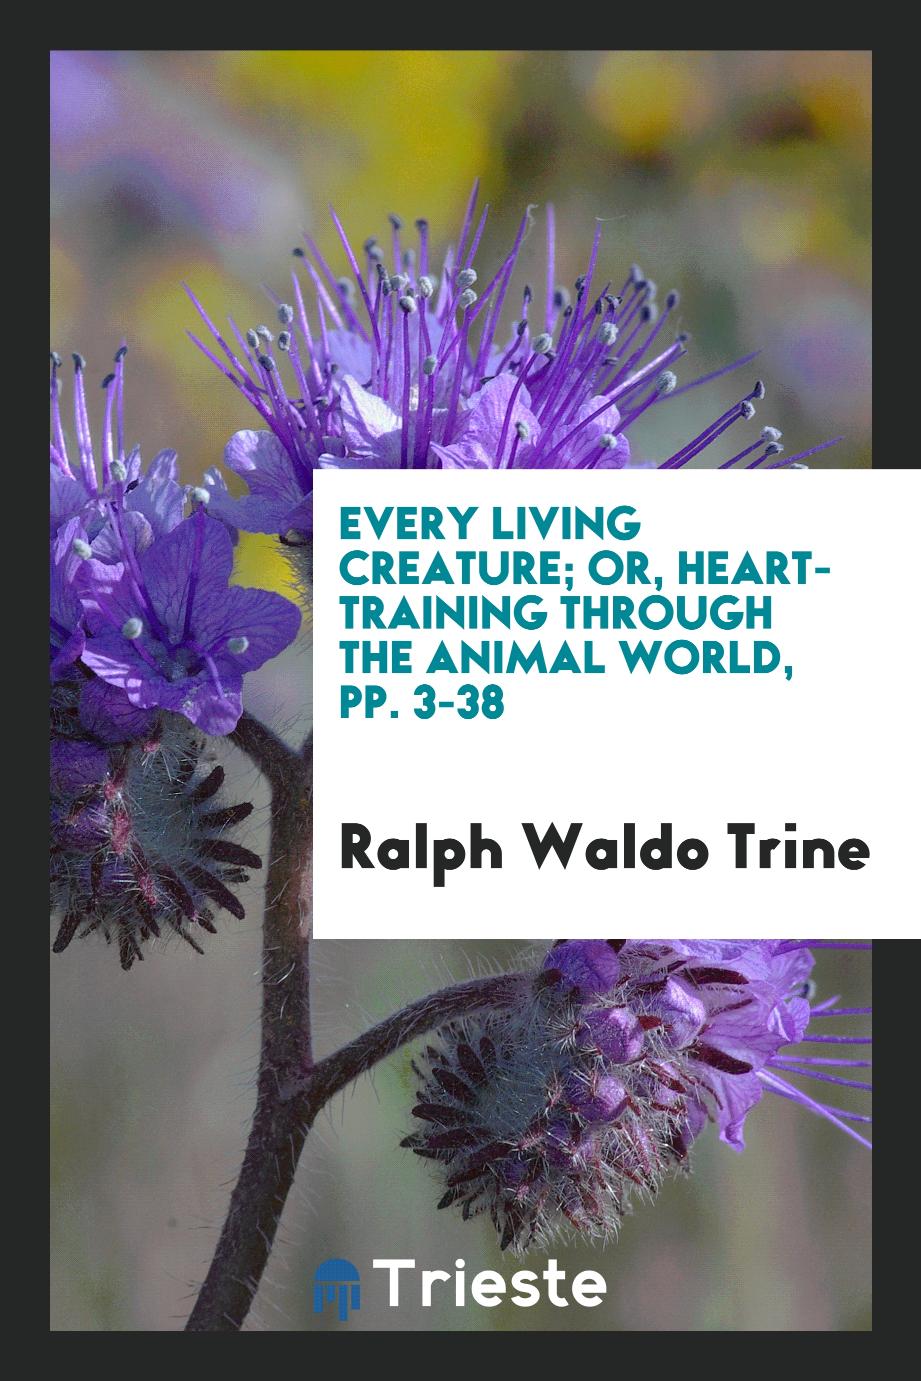 Every Living Creature; or, Heart-training through the animal world, pp. 3-38